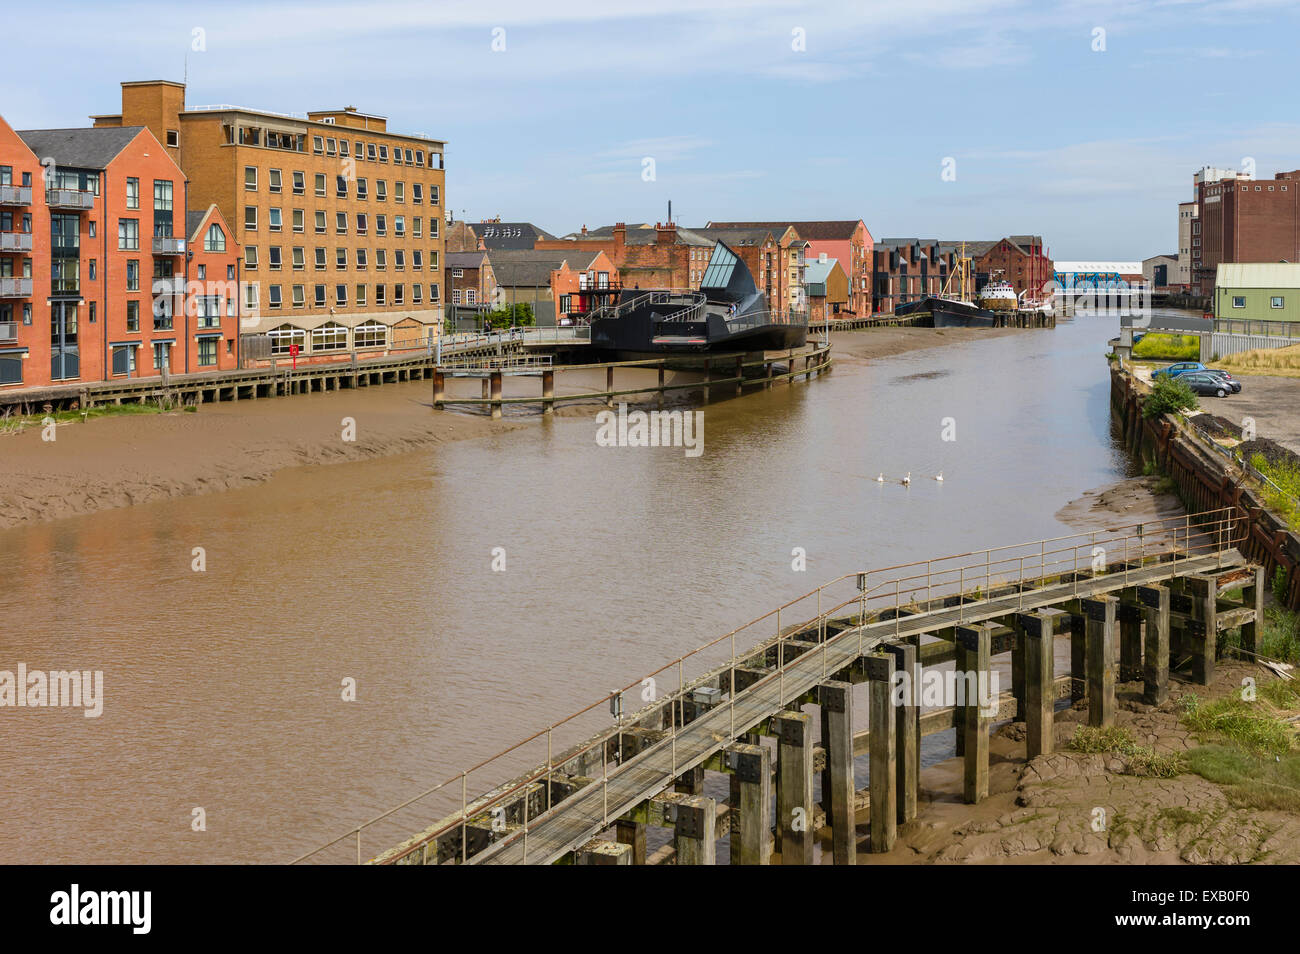 River Hull at low tide with view of Scale Lane swing brige (open), beached obsolete ship, and flanked by buildings. Stock Photo